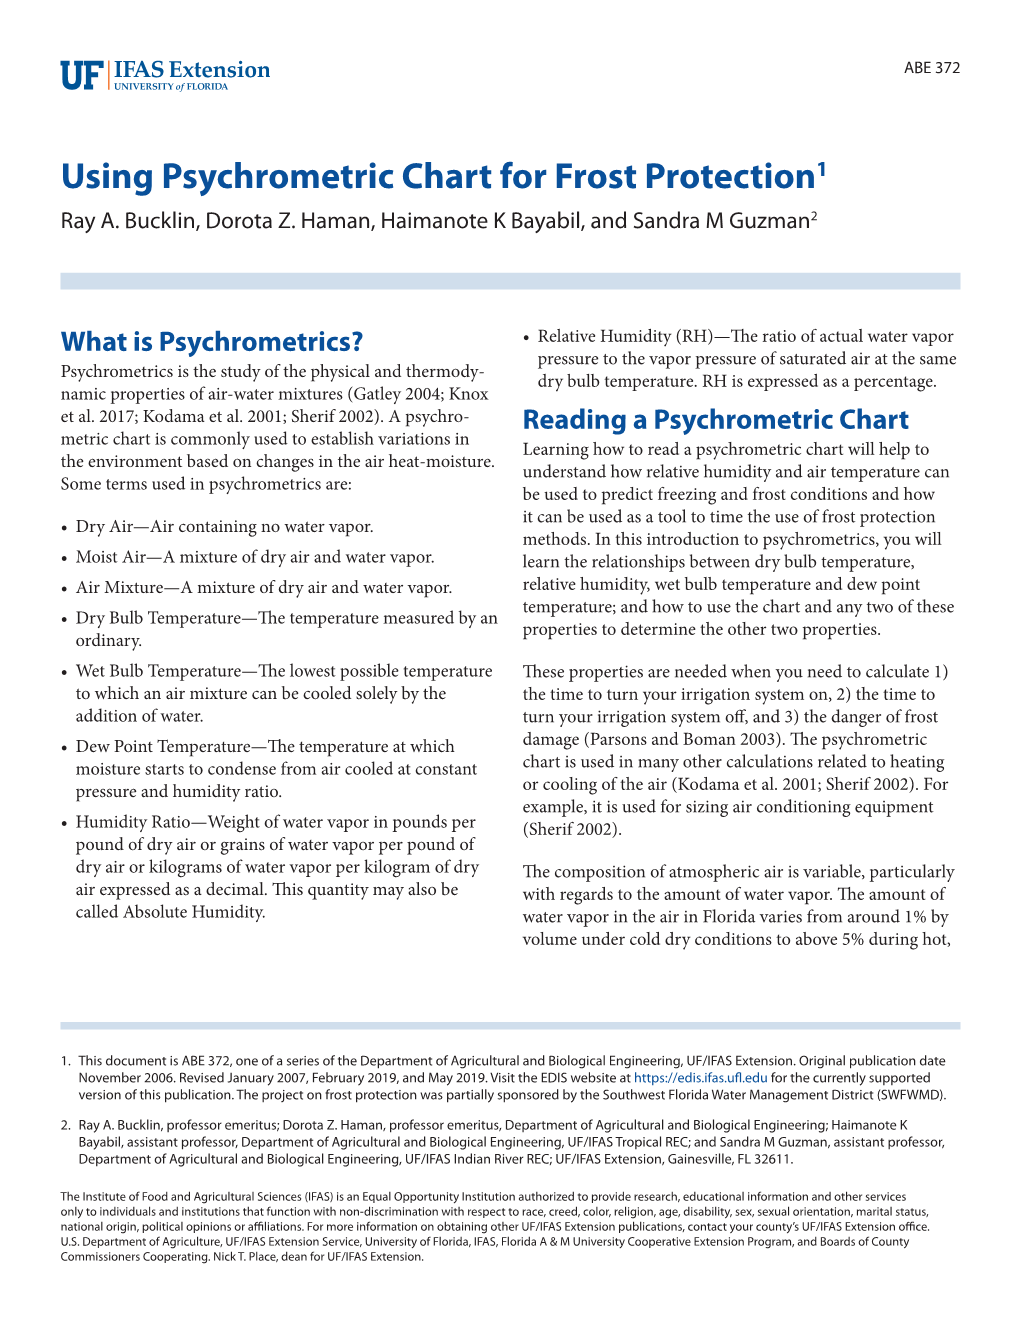 Using Psychrometric Chart for Frost Protection1 Ray A